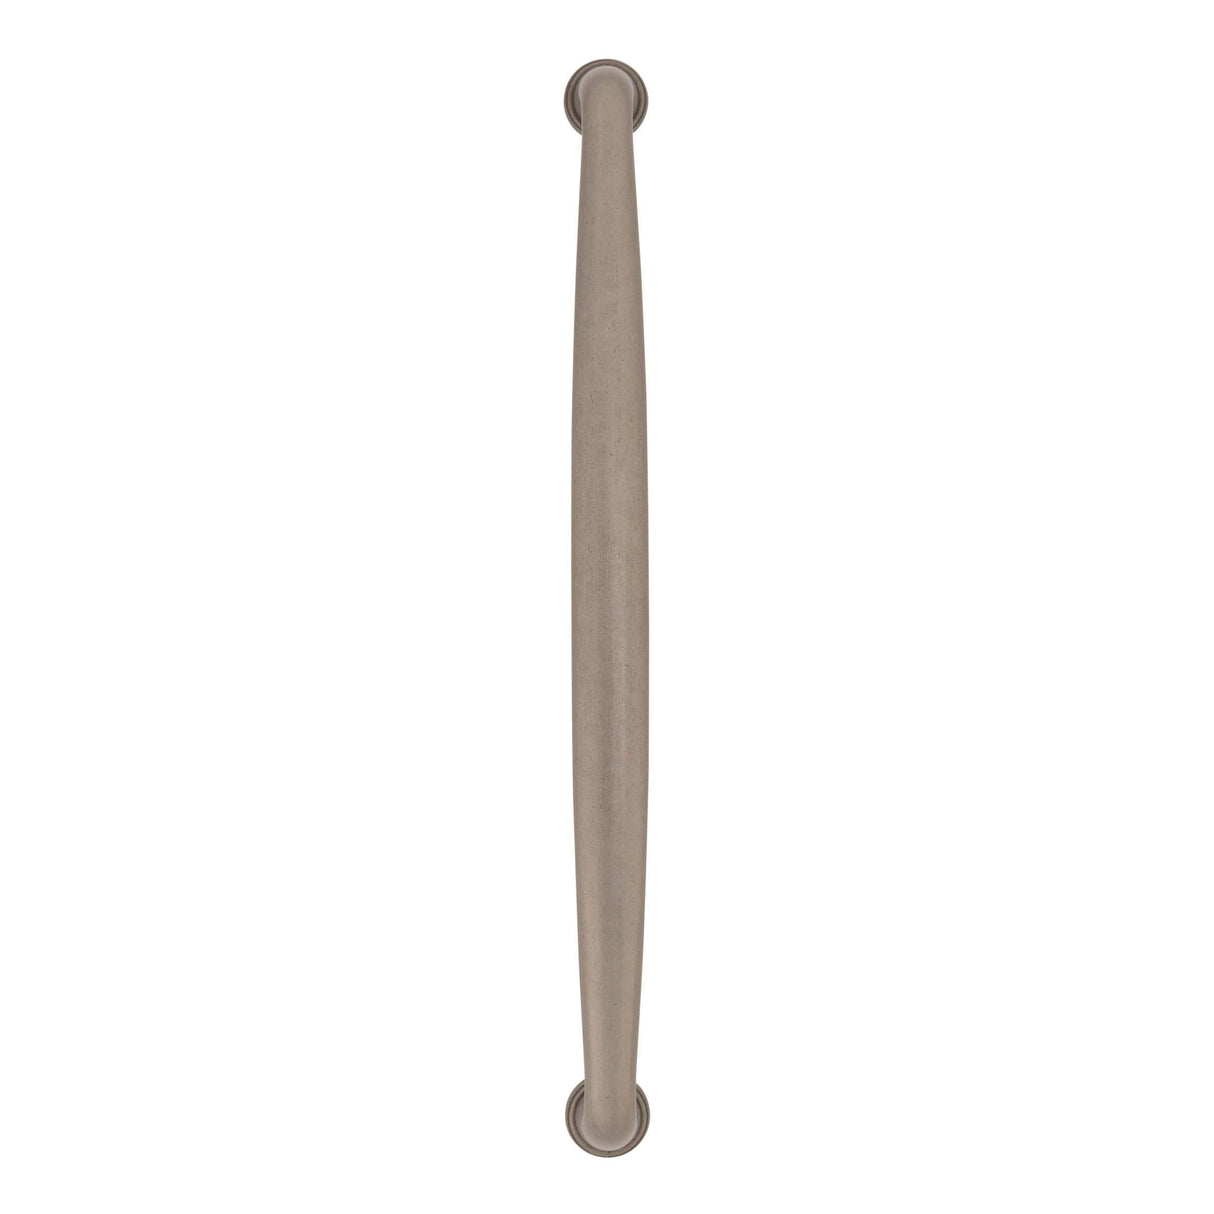 Amerock Appliance Pull Weathered Nickel 12 inch (305 mm) Center to Center Kane 1 Pack Drawer Pull Drawer Handle Cabinet Hardware